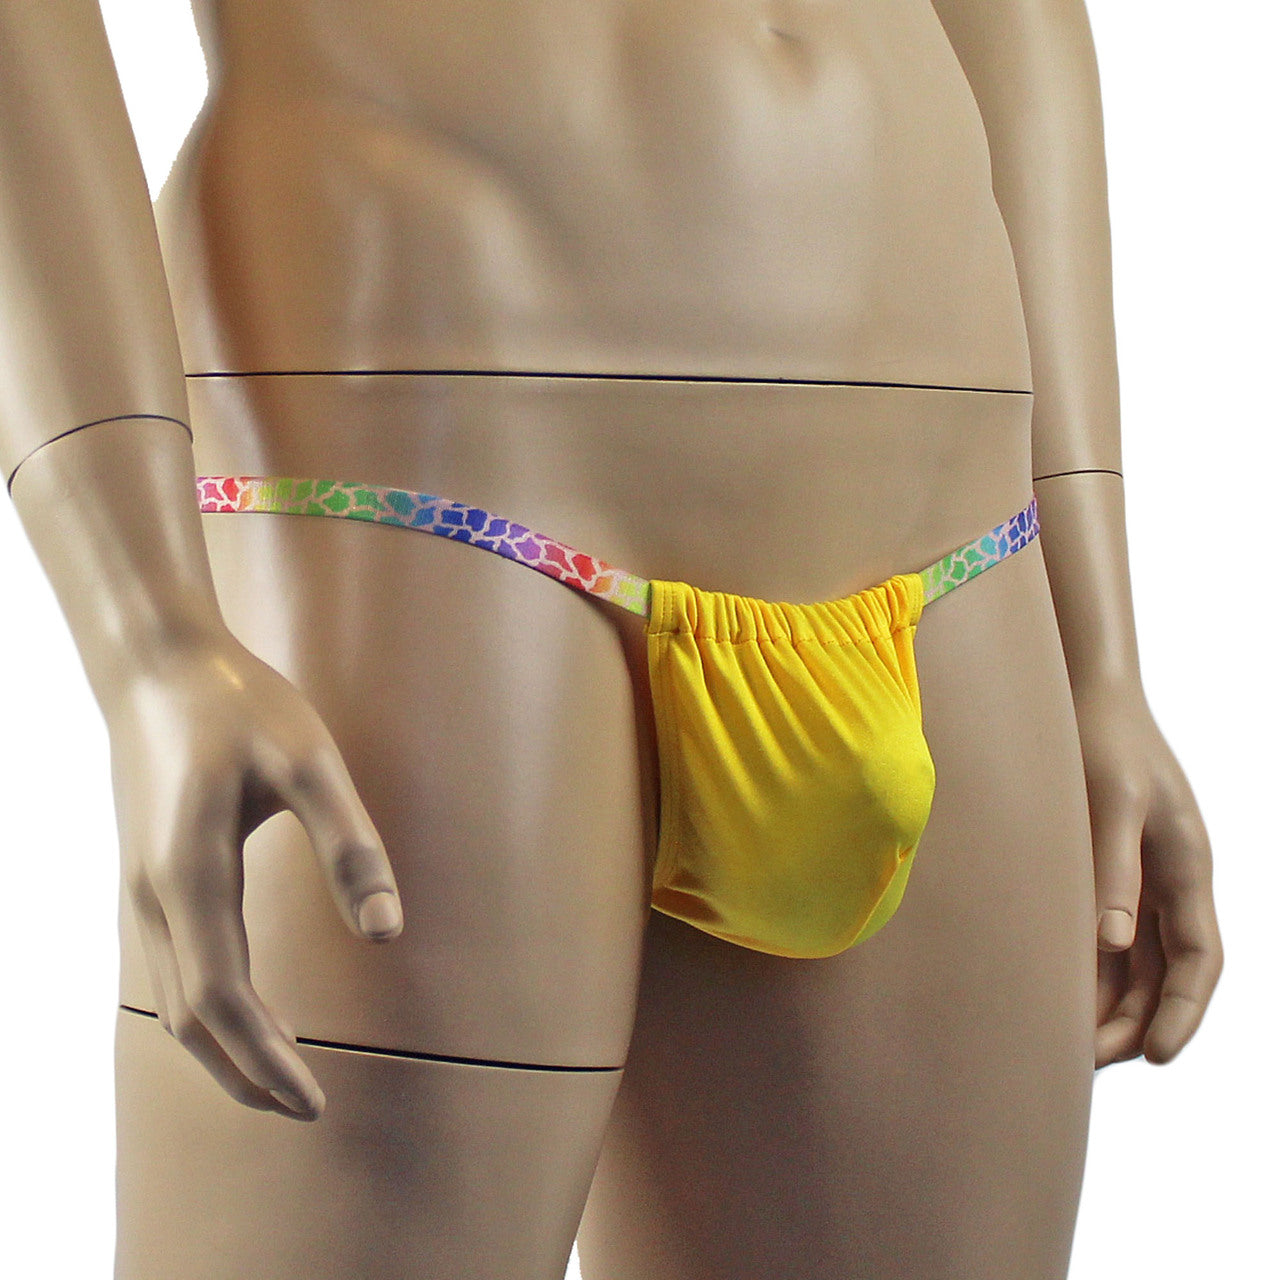 Mens Wild Colourful Adjustable Ball Bag Pouch G string Underwear (yellow plus other colours)